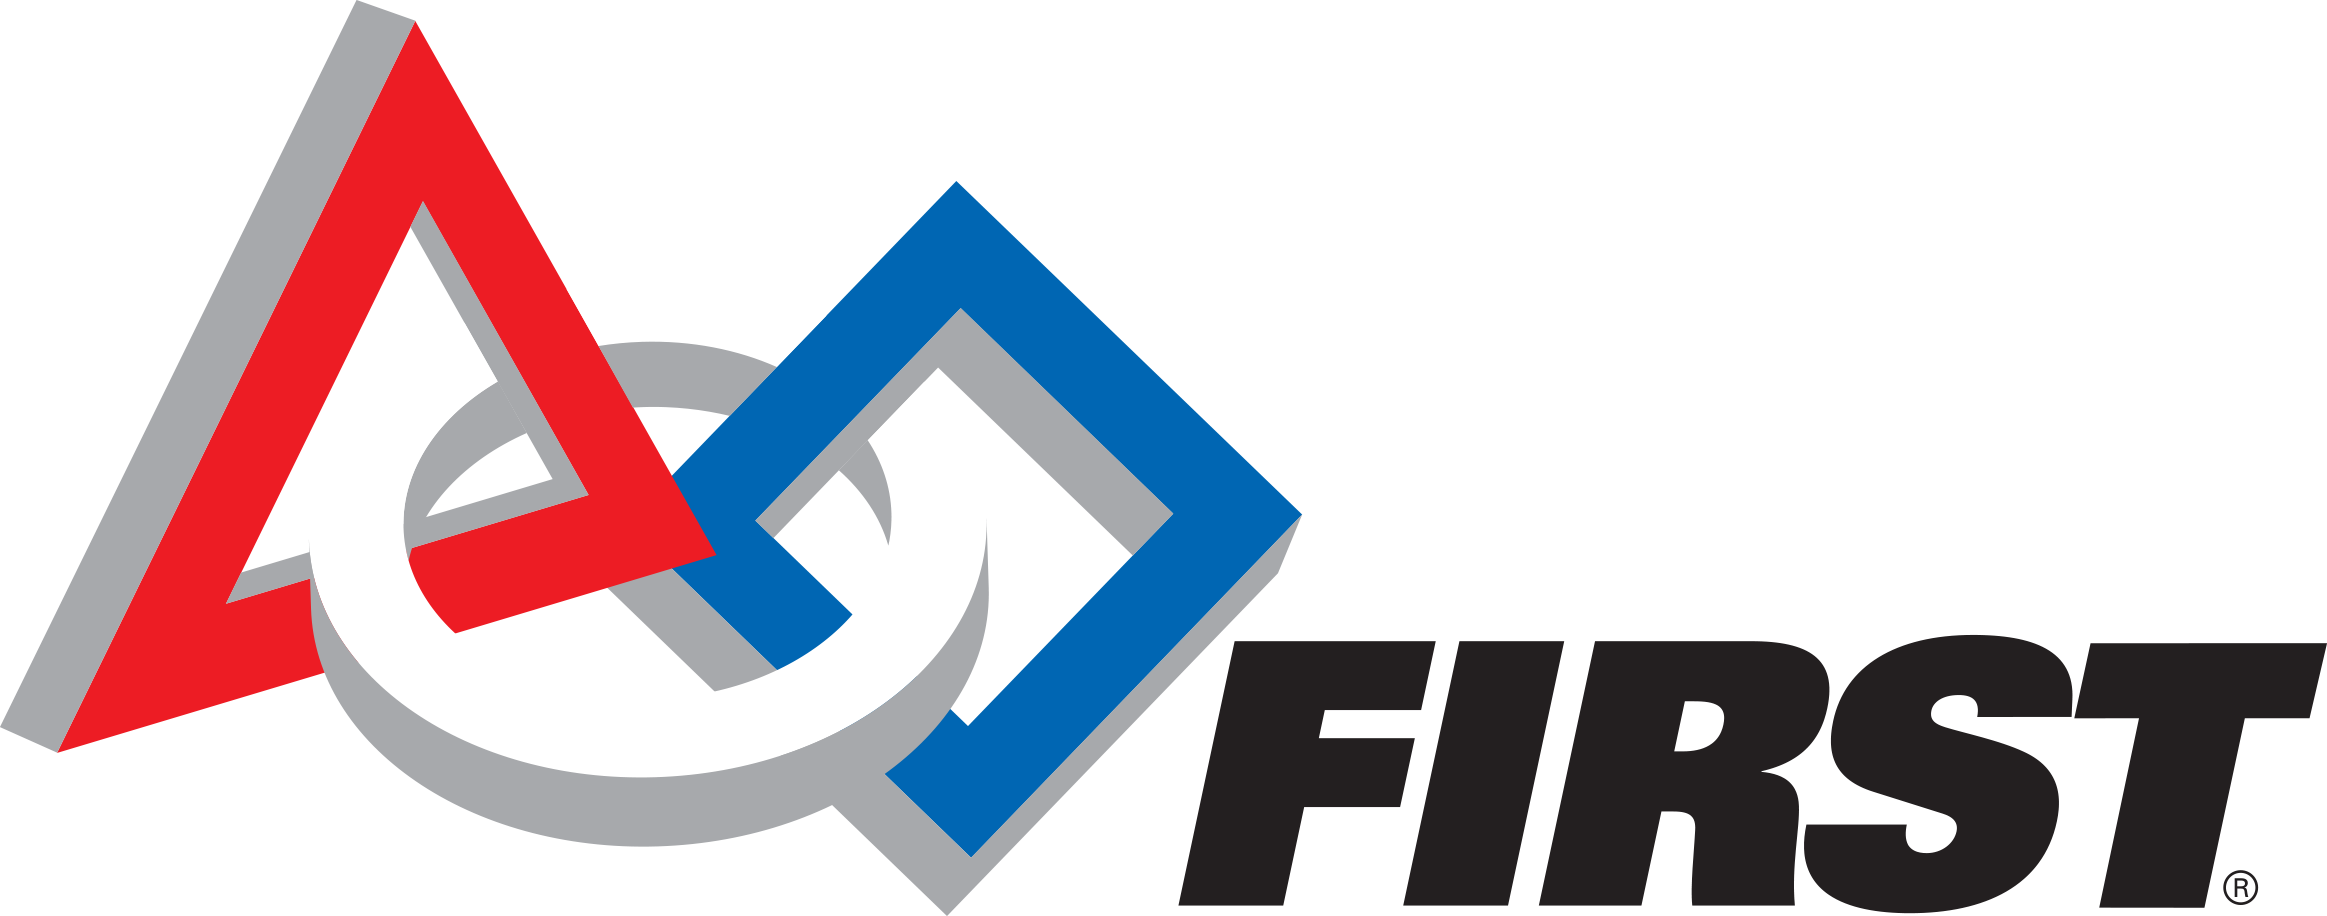 Download Logo For First Robotics - First Robotics Competition Png PNG Image with No Background - PNGkey.com